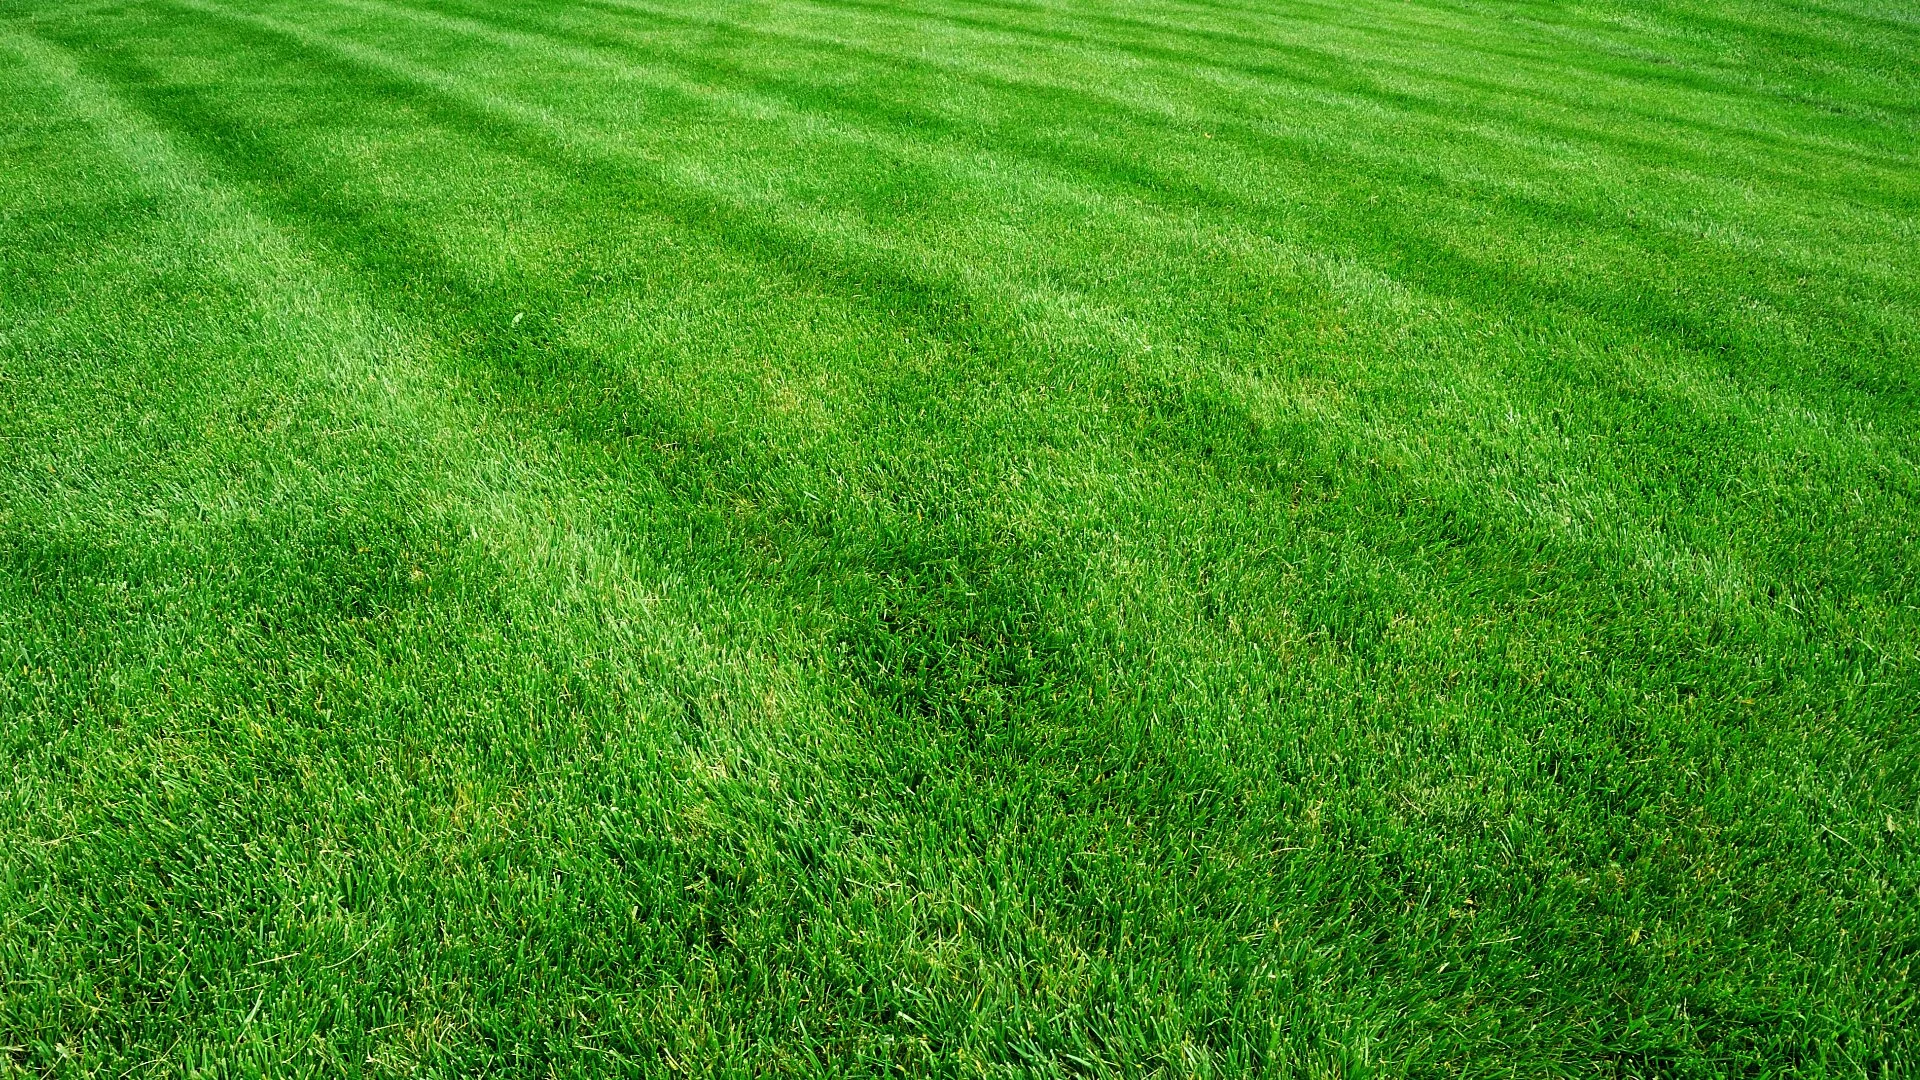 Is It Necessary to Fertilize Your Lawn in Texas in the Fall?